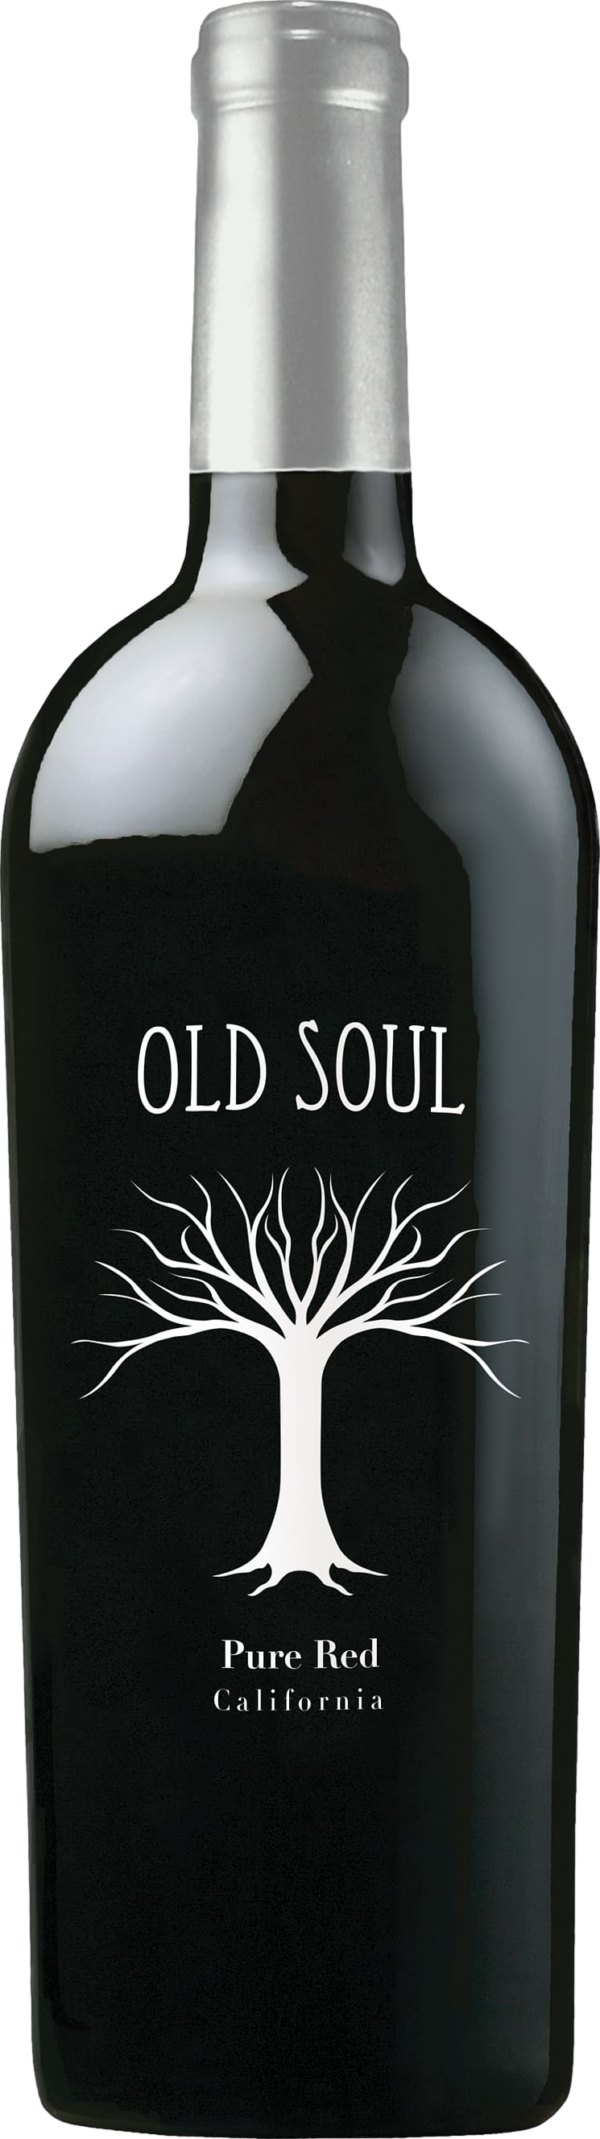 Product image of Old Soul Pure Red 2020 from 8wines